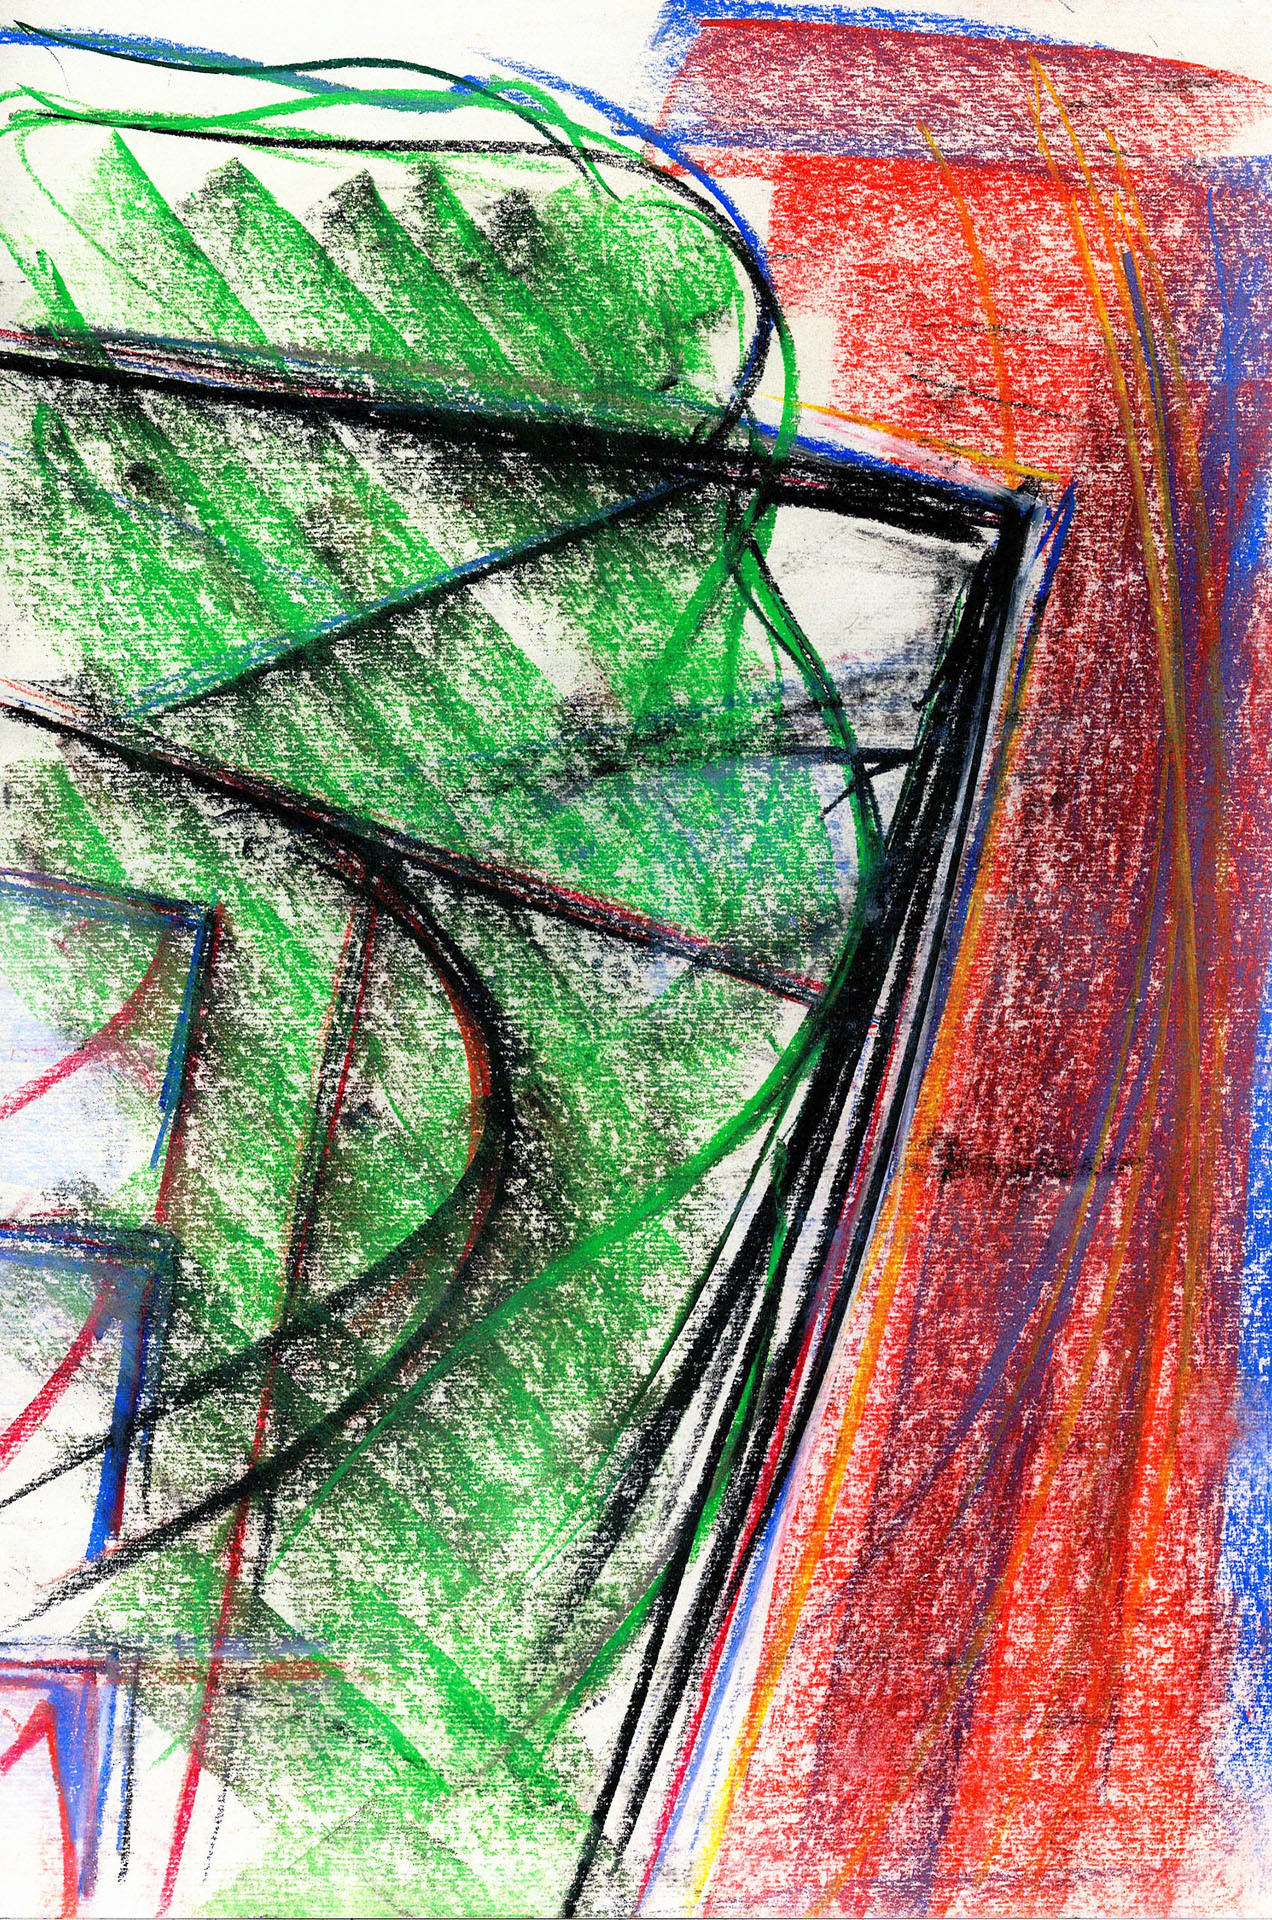 “Invisible Cities #1, Milano”
2009, Pastel drawing, 297 x 420 mm